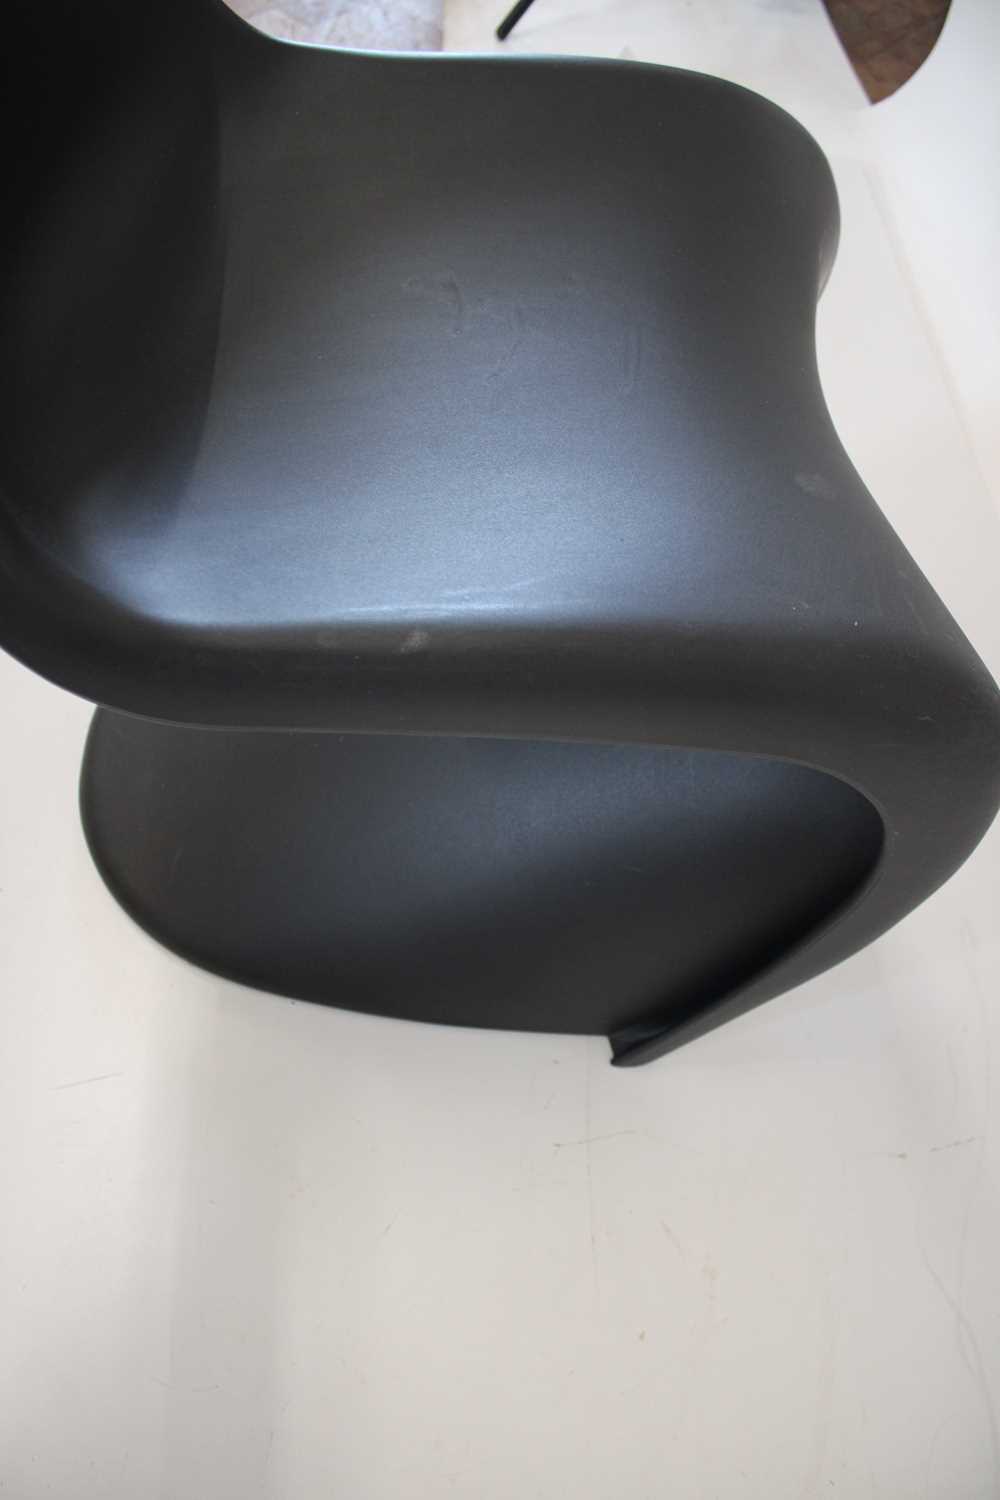 Verner Panton for Vitra Set of Four "Panton" Chairs - Image 11 of 16